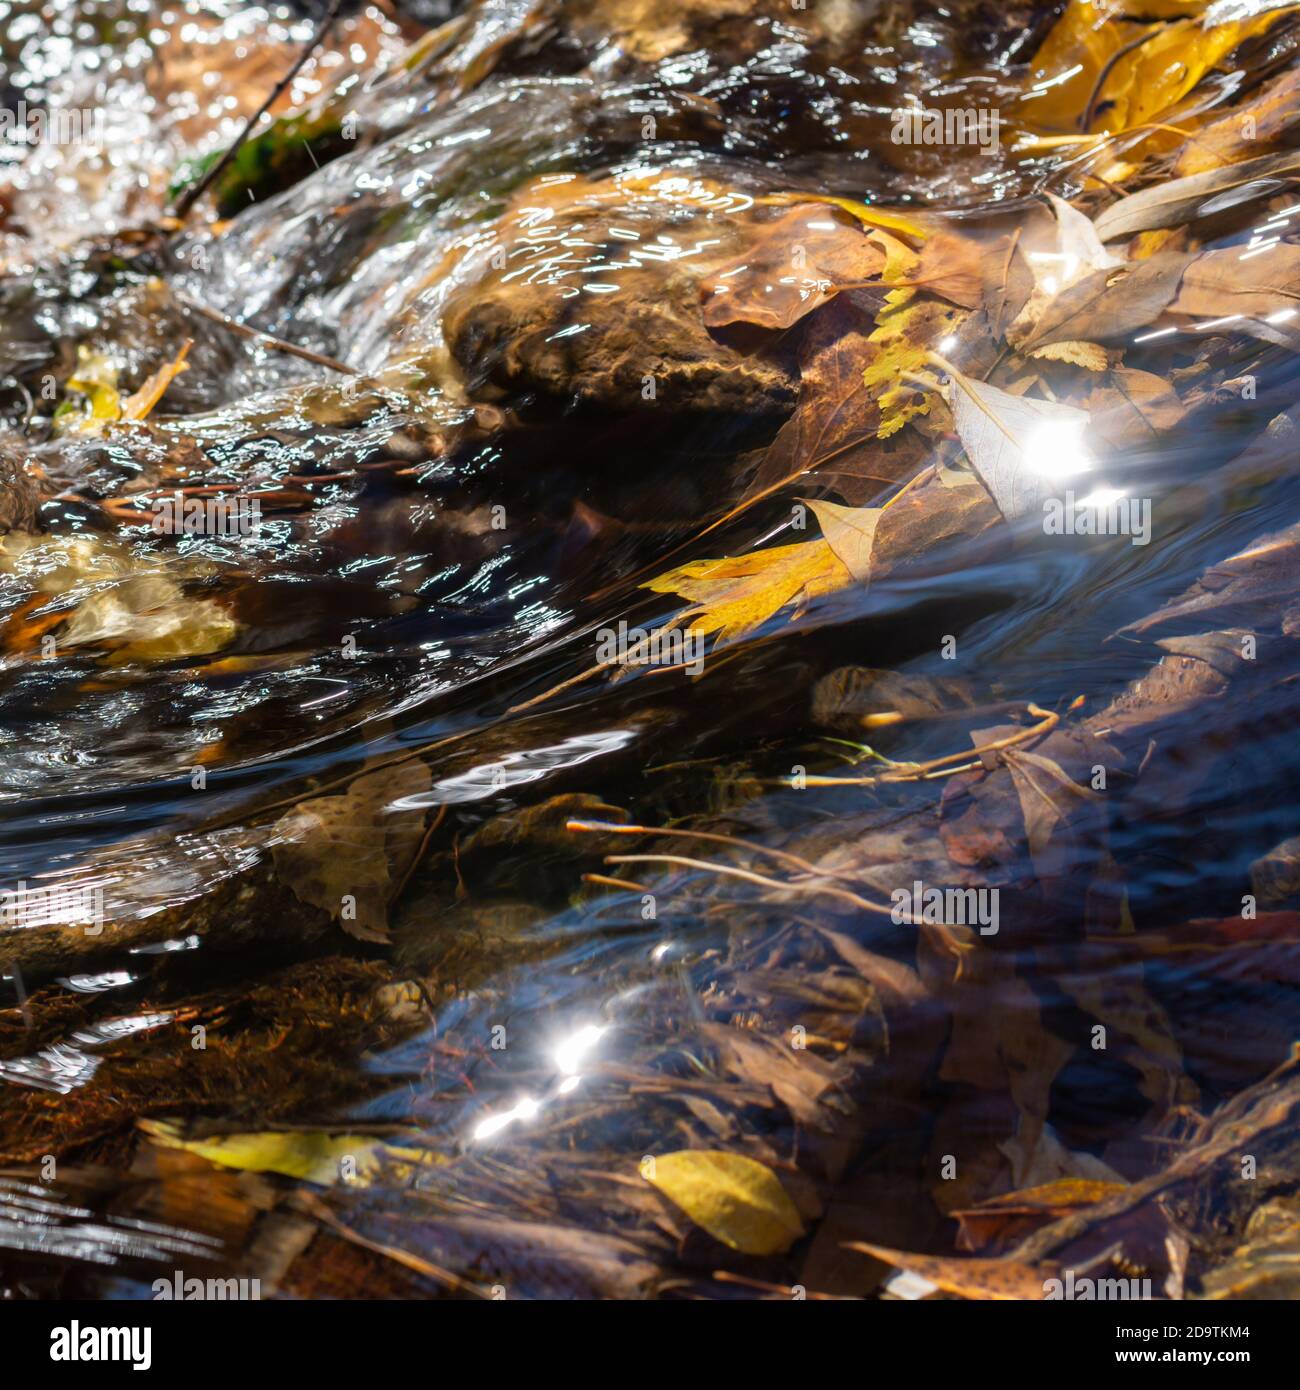 Crystal clear water stream (Rio Fardes) between trees in a forest with fallen autumn leaves Stock Photo